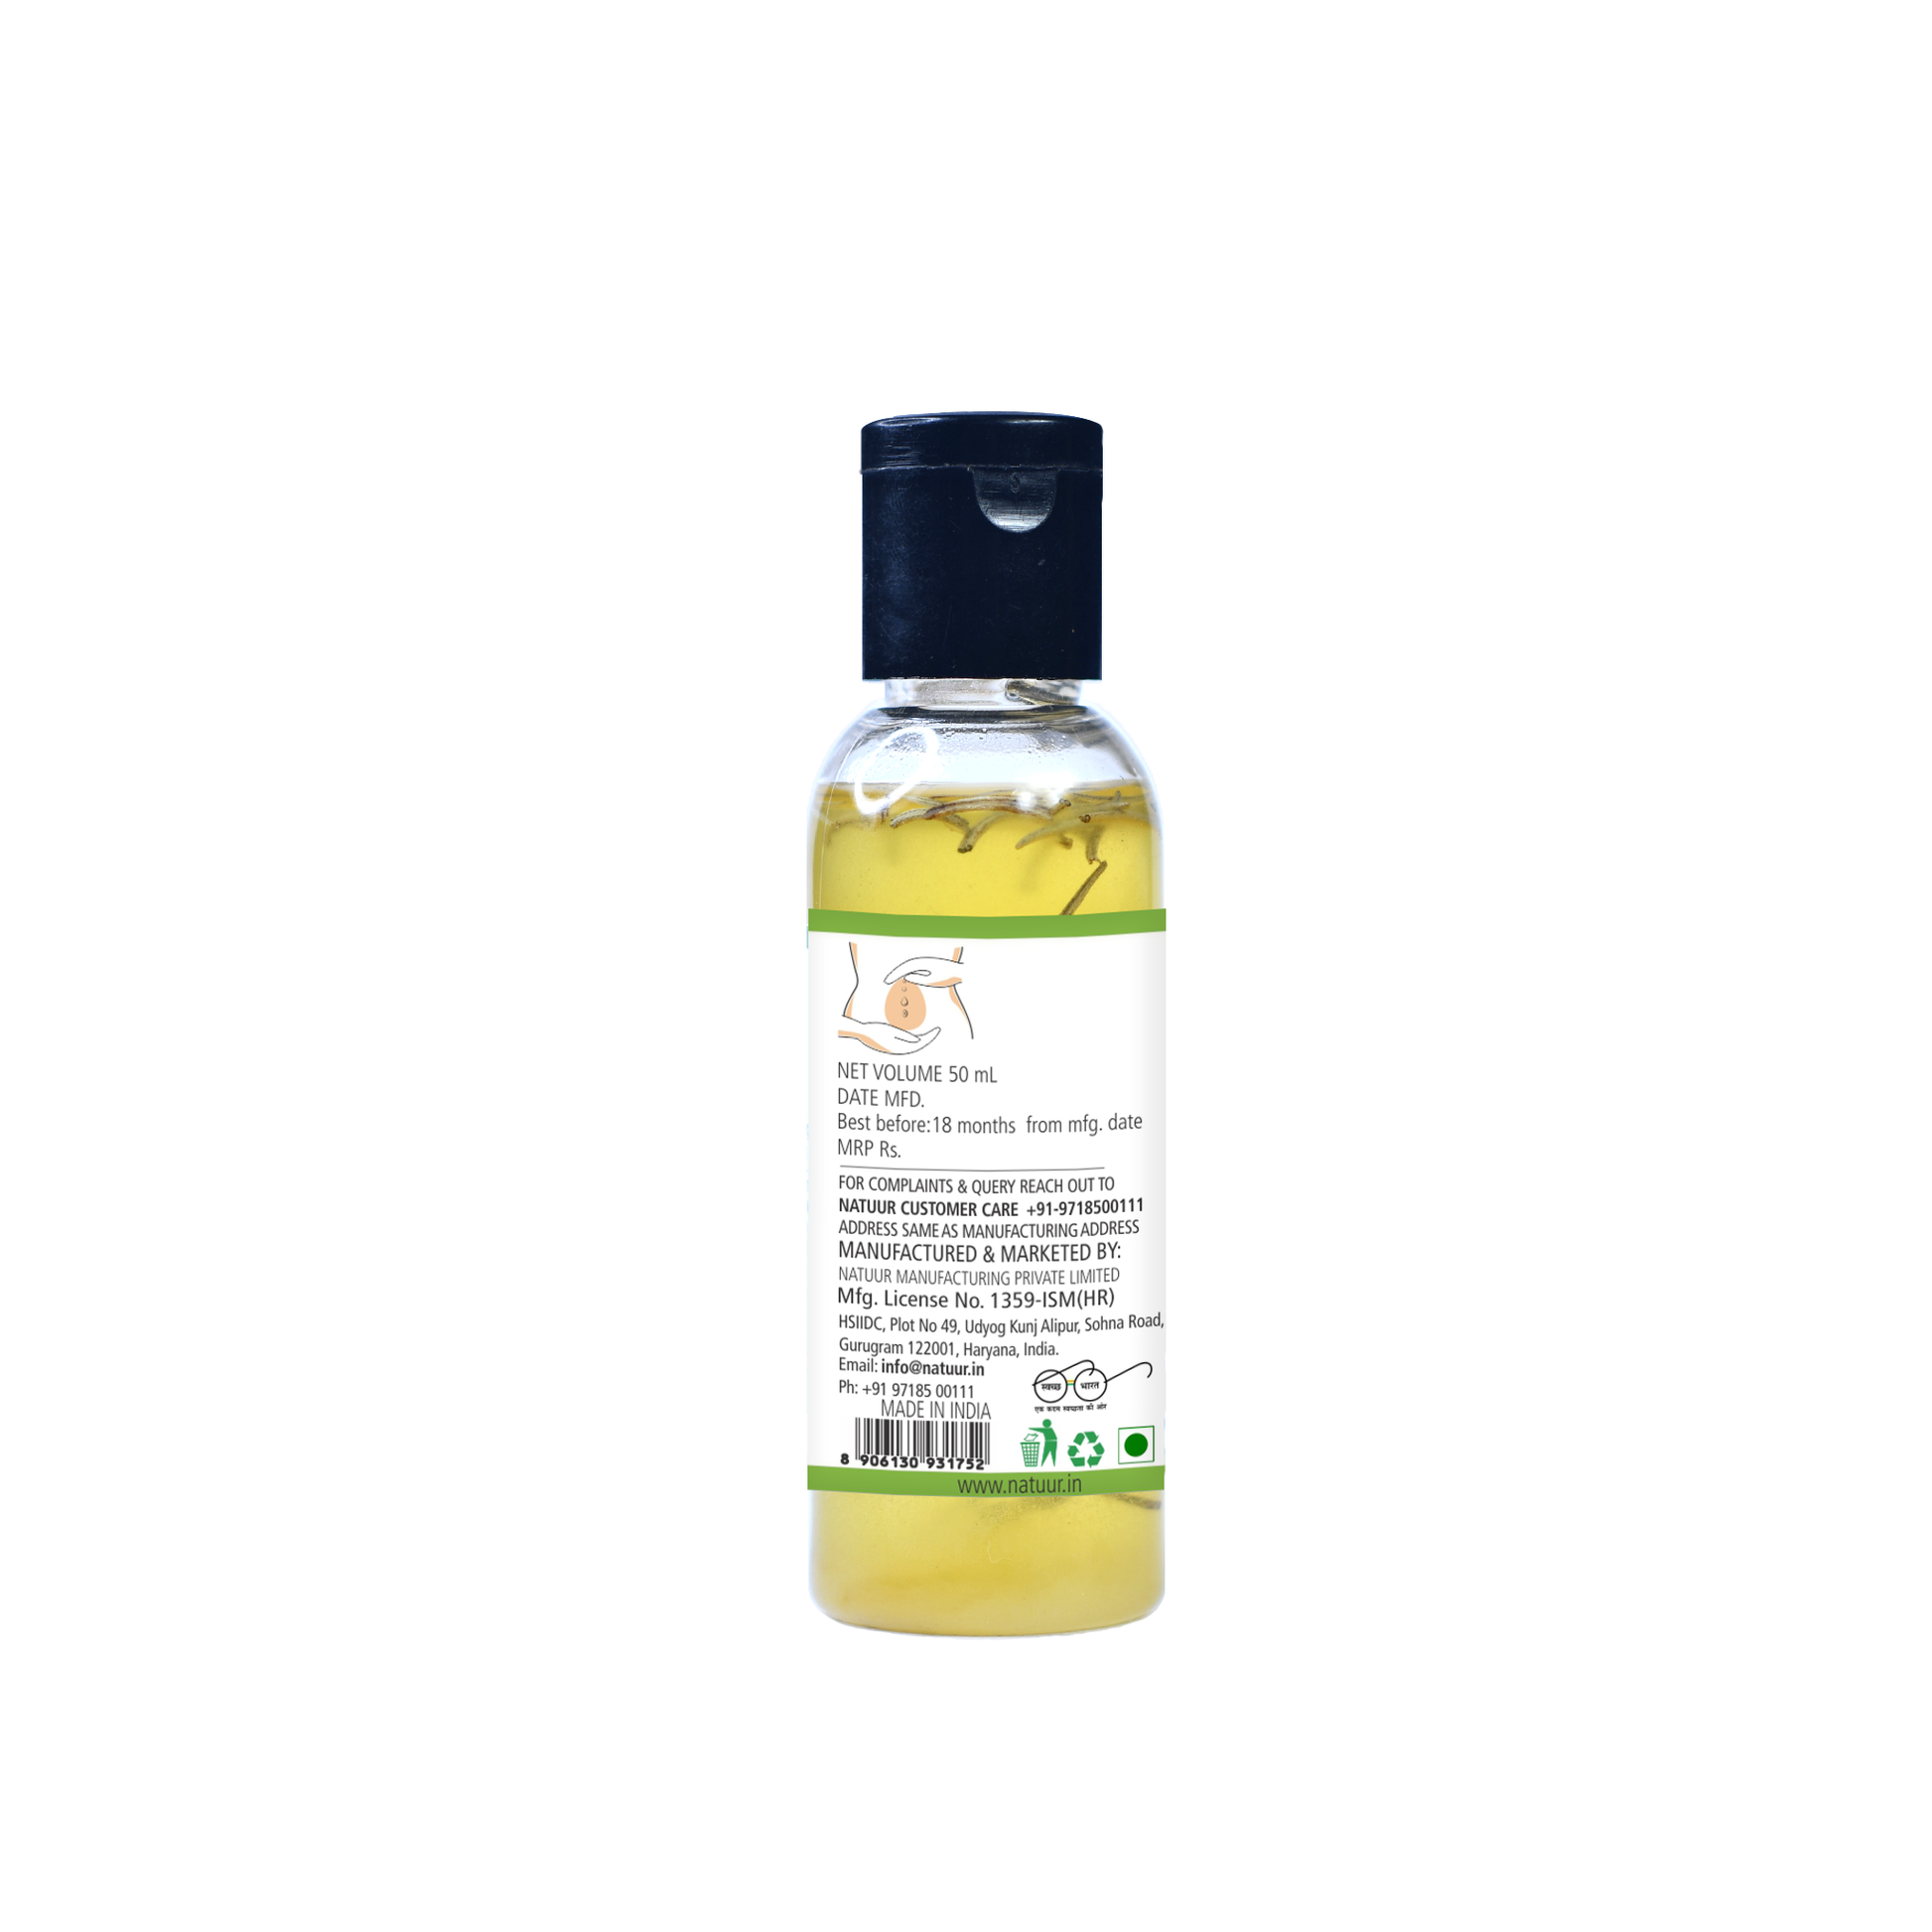 Belly Button Oil for Menstrual Pain Relief Oil(50ml) - Natuur.in